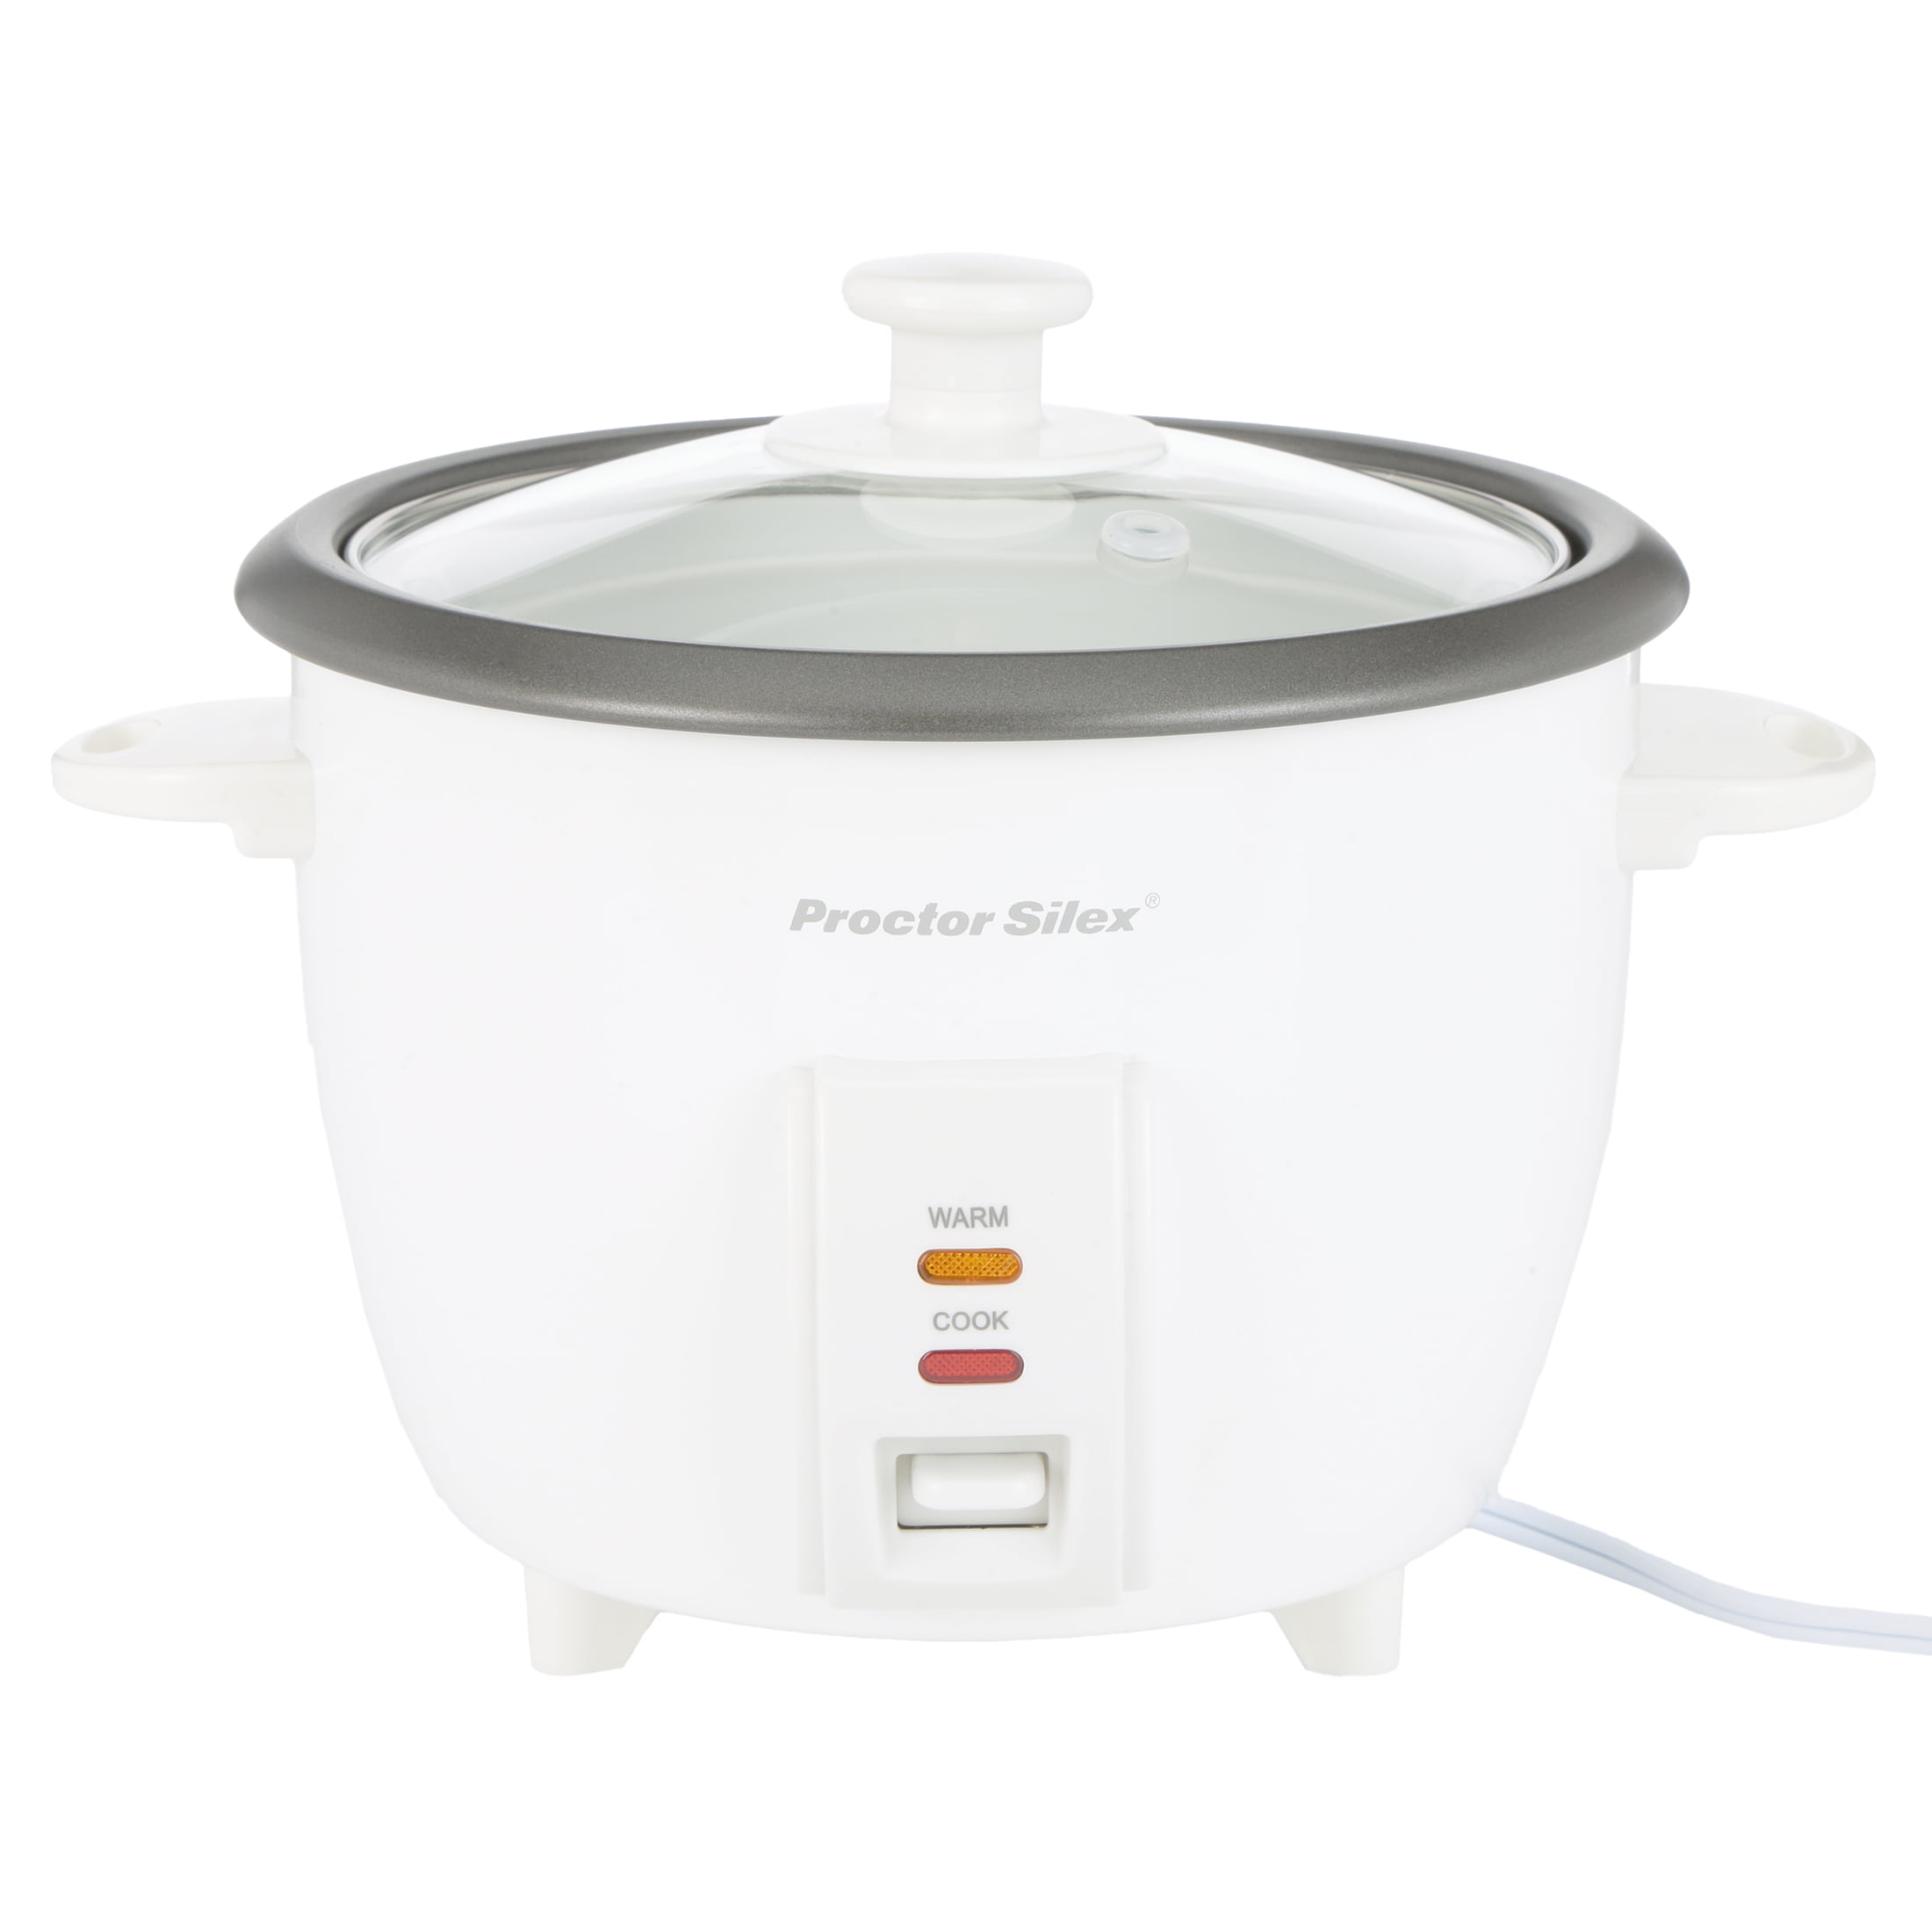 10 Cup Rice Cooker & Steamer - Model - 37533PS